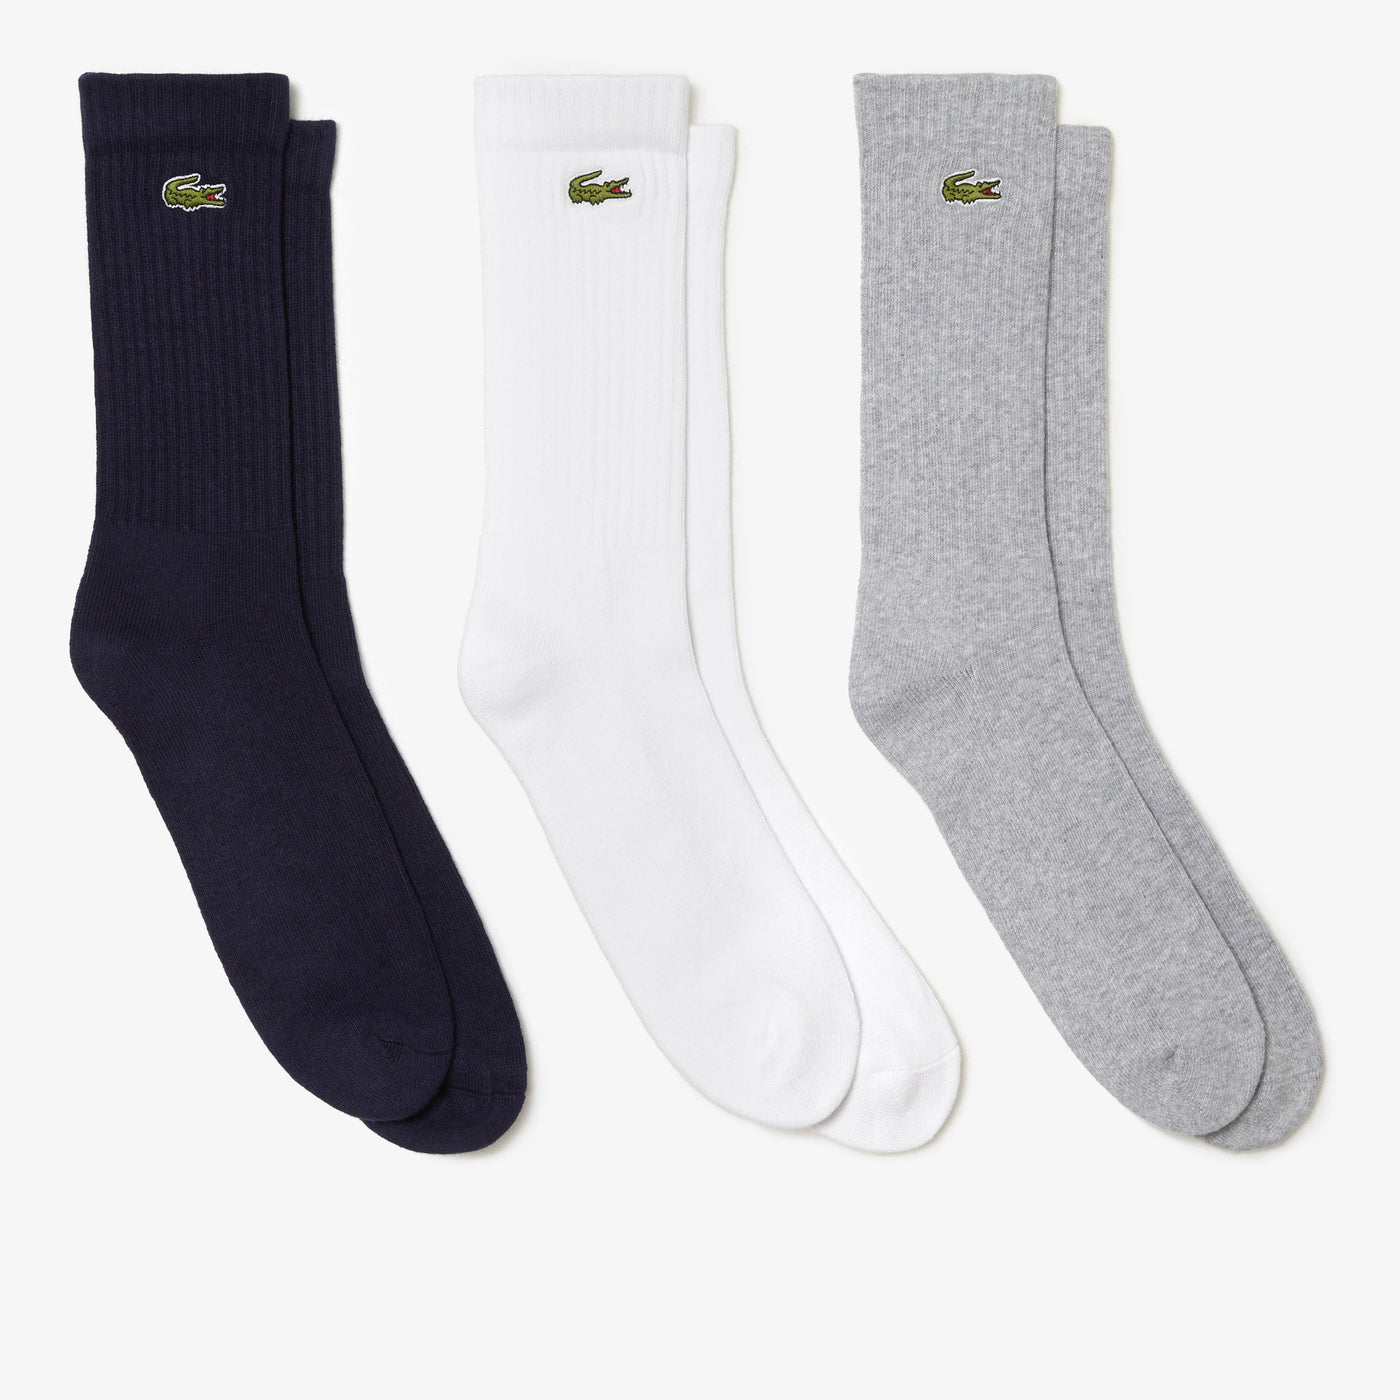 Shop The Latest Collection Of Lacoste Unisex Lacoste Sport High-Cut Socks Three-Pack - Ra4182 In Lebanon